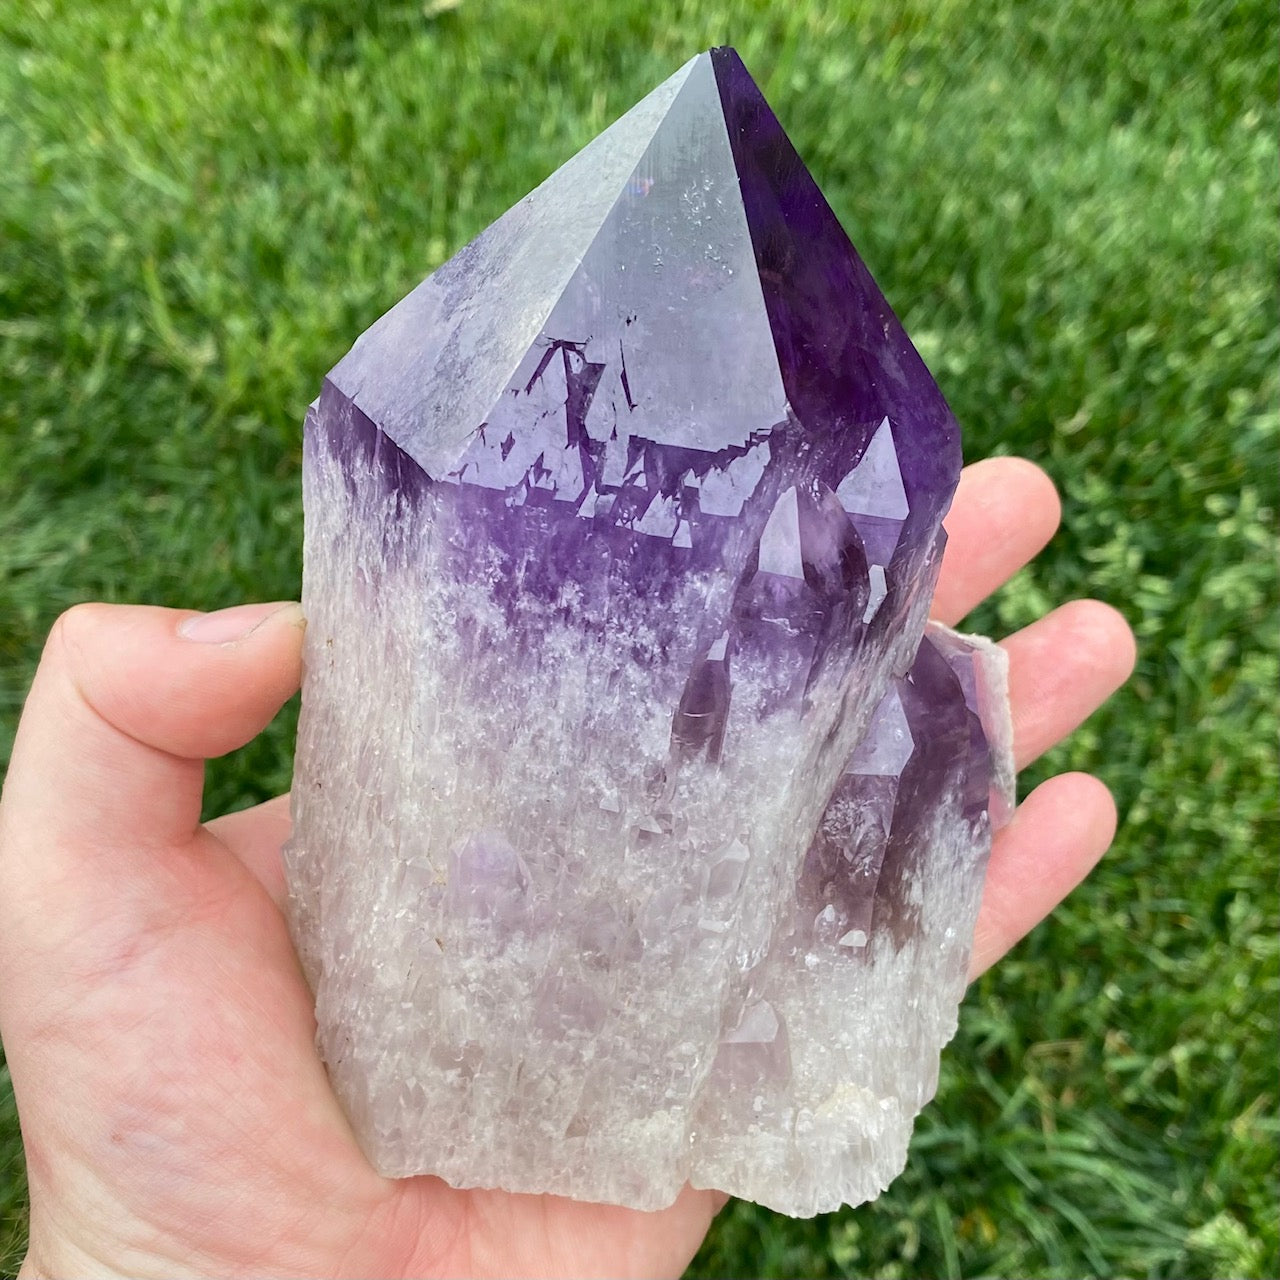 4Kilo Big Cluster of Amethyst Crystals from Bolivia - Mineral Mike